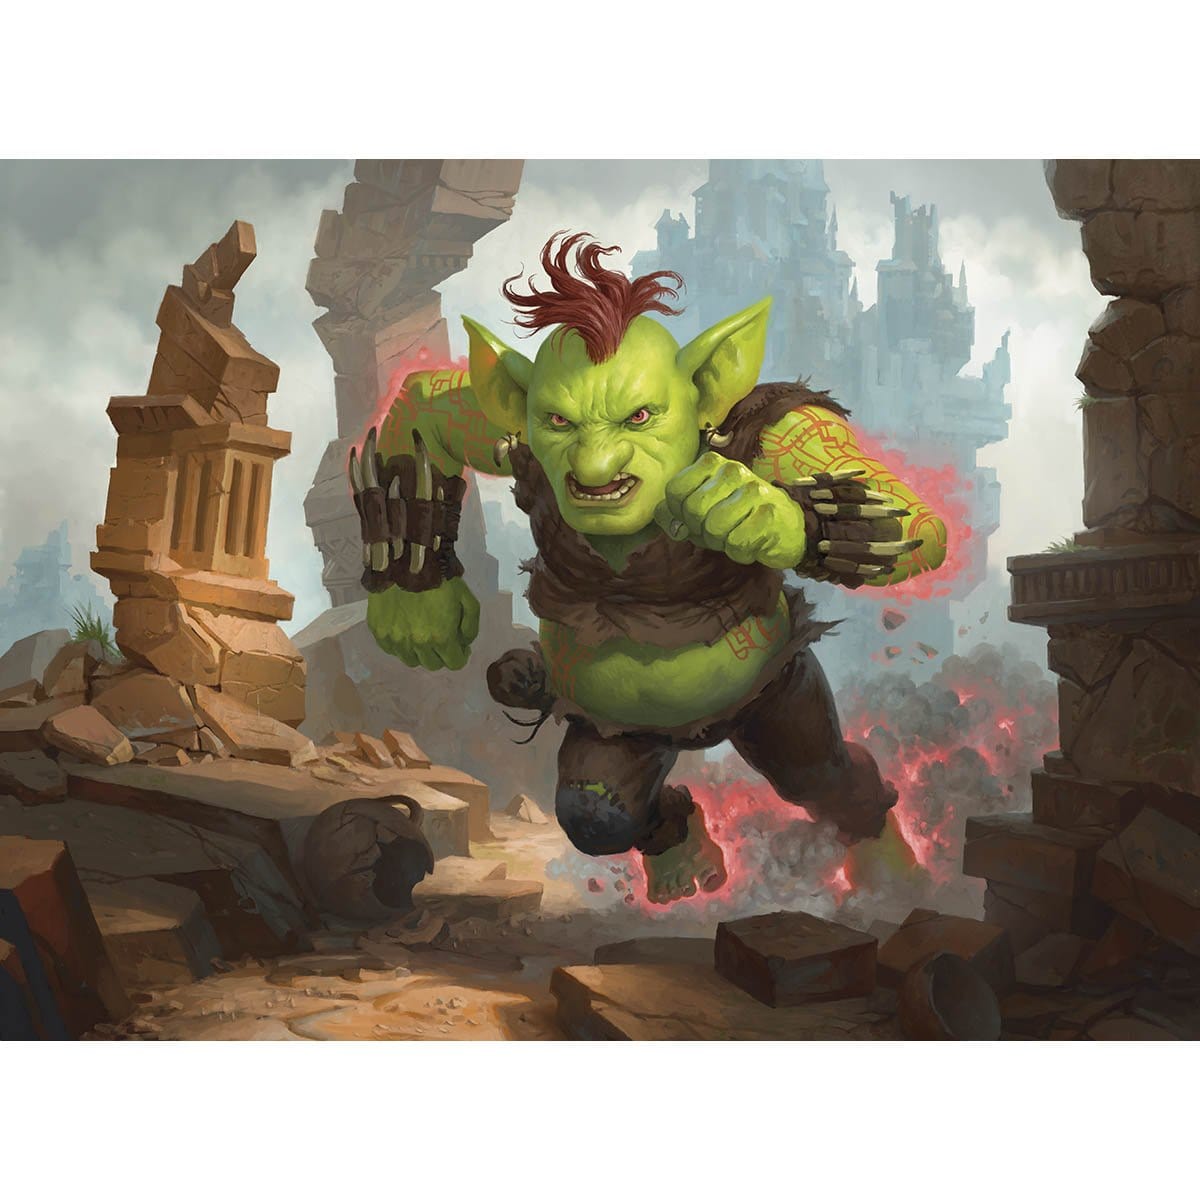 Raging Goblin Print - Print - Original Magic Art - Accessories for Magic the Gathering and other card games